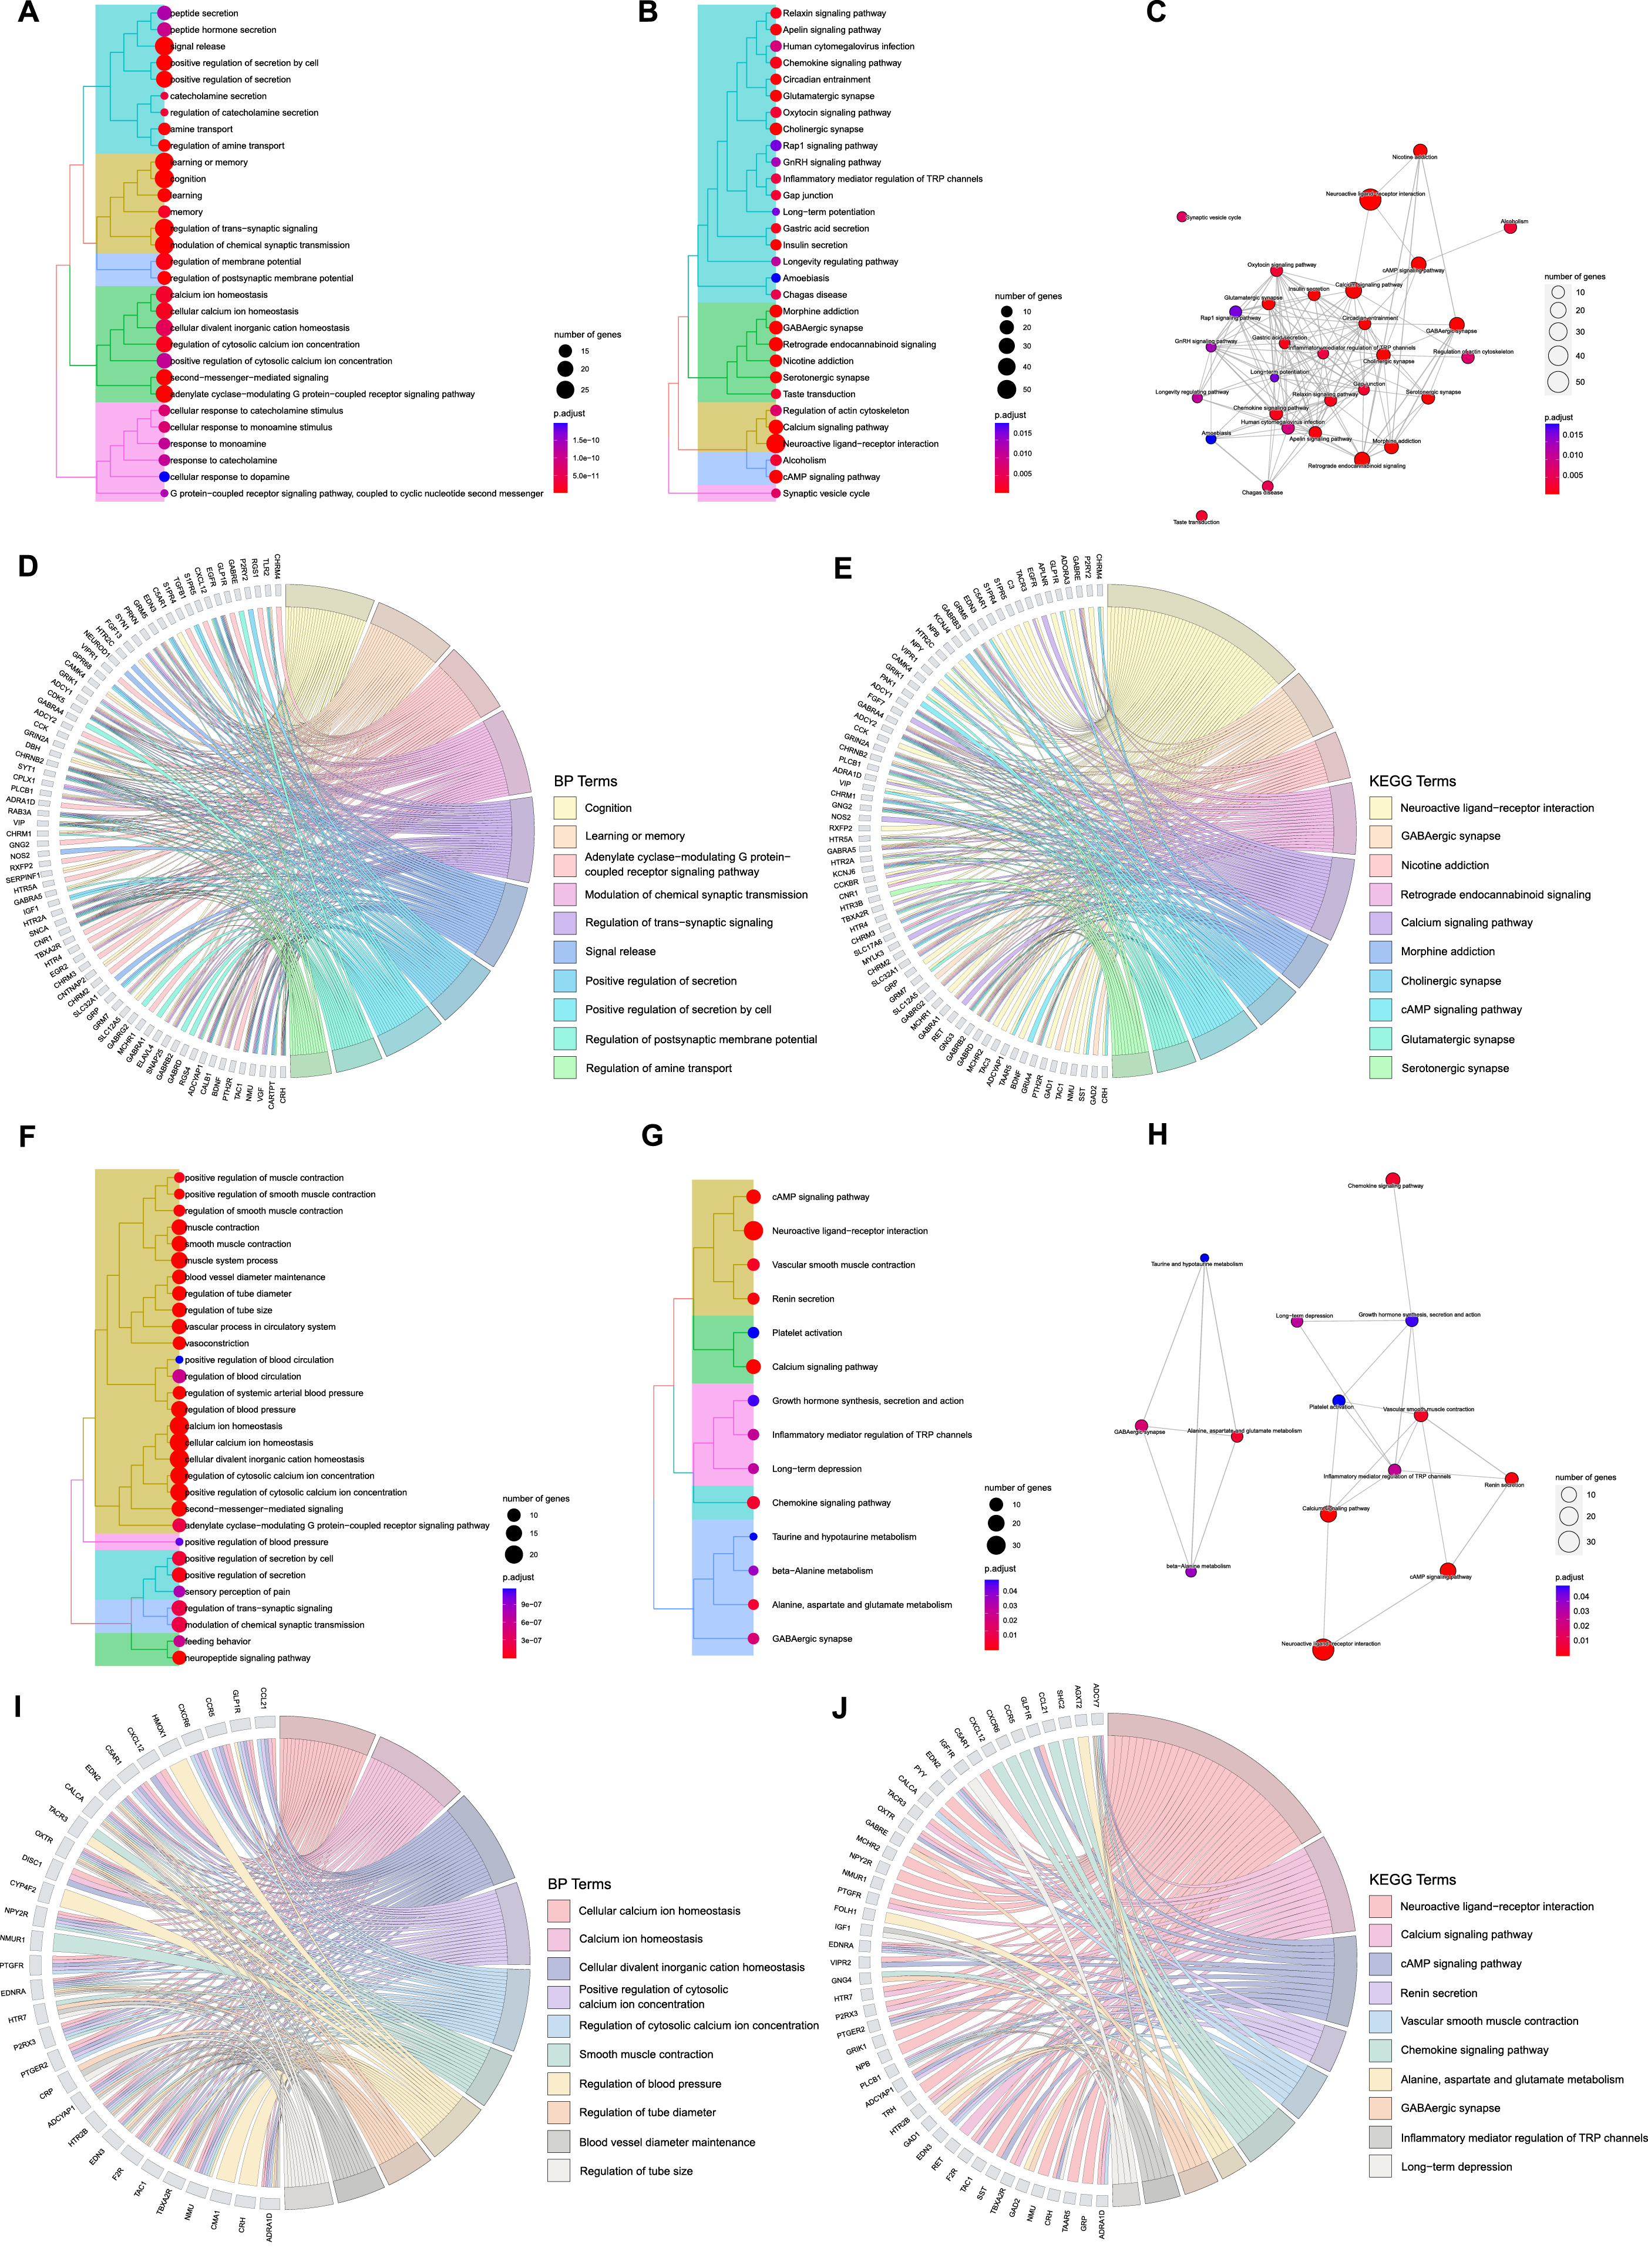 Functional enrichment analysis of acupuncture therapeutic targets associated with Alzheimer’s disease (AD) and vascular dementia (VaD). A) Tree plot of top 30 biological process (BP) terms of acupuncture therapy (AT) on AD (p-adjust< 0.05). B) Tree plot of top 30 Kyoto Encyclopedia of Genes and Genomes (KEGG) terms of AT on AD (p-adjust< 0.05). C) Enrichment map plot of top 30 KEGG terms of AT on AD (p-adjust< 0.05). D) Chord plot of top 10 BP terms of AT on AD (p-adjust< 0.05). E) Chord plot of top 10 KEGG terms of AT on AD (p-adjust < 0.05). F) Tree plot of top 30 BP terms of AT on VaD (p-adjust < 0.05). G) Tree plot of all KEGG terms of AT on VaD (p-adjust < 0.05). H) Enrichment map plot of all KEGG terms of AT on VaD (p-adjust < 0.05). I) Chord plot of top 10 BP terms of AT on VaD (p-adjust < 0.05). J) Chord plot of top 10 KEGG terms of AT on VaD (p-adjust < 0.05).